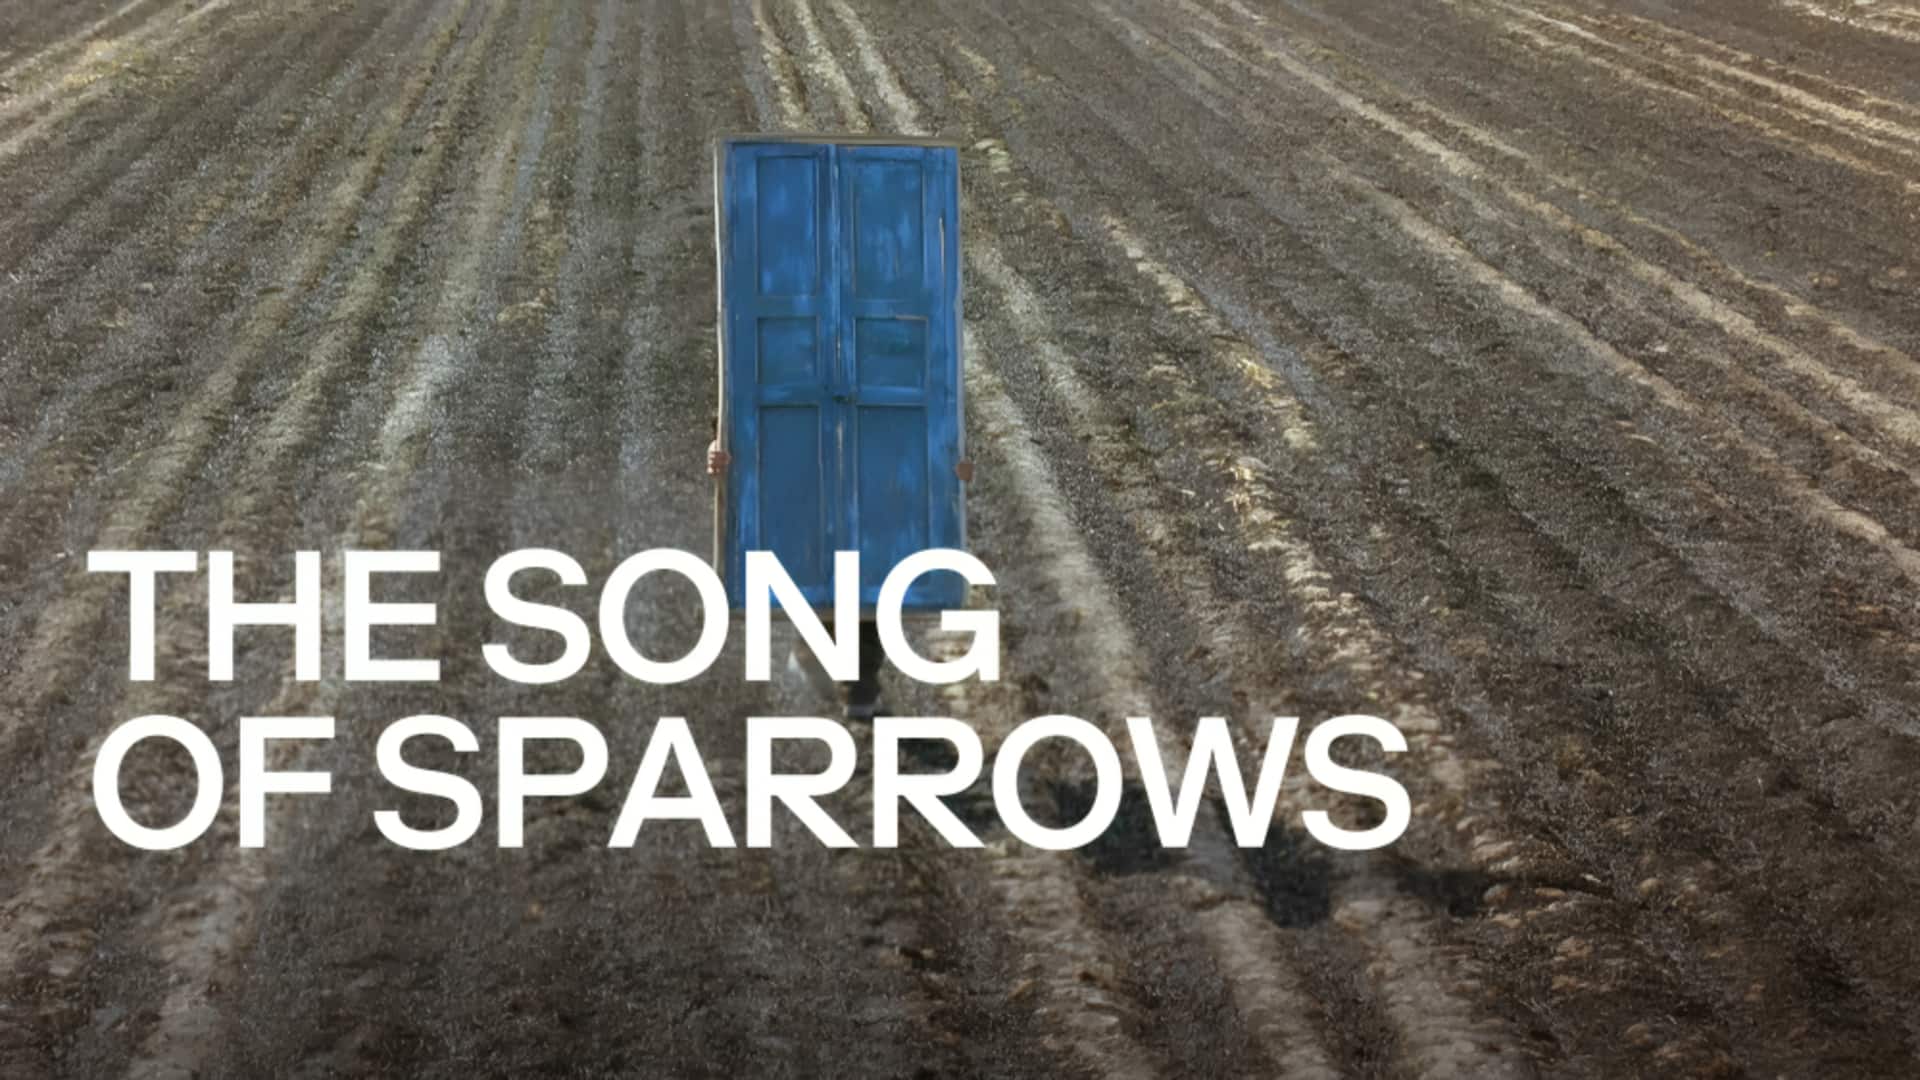 NewsBytes Recommends: 'The Song of Sparrows'—finding life amid despondency